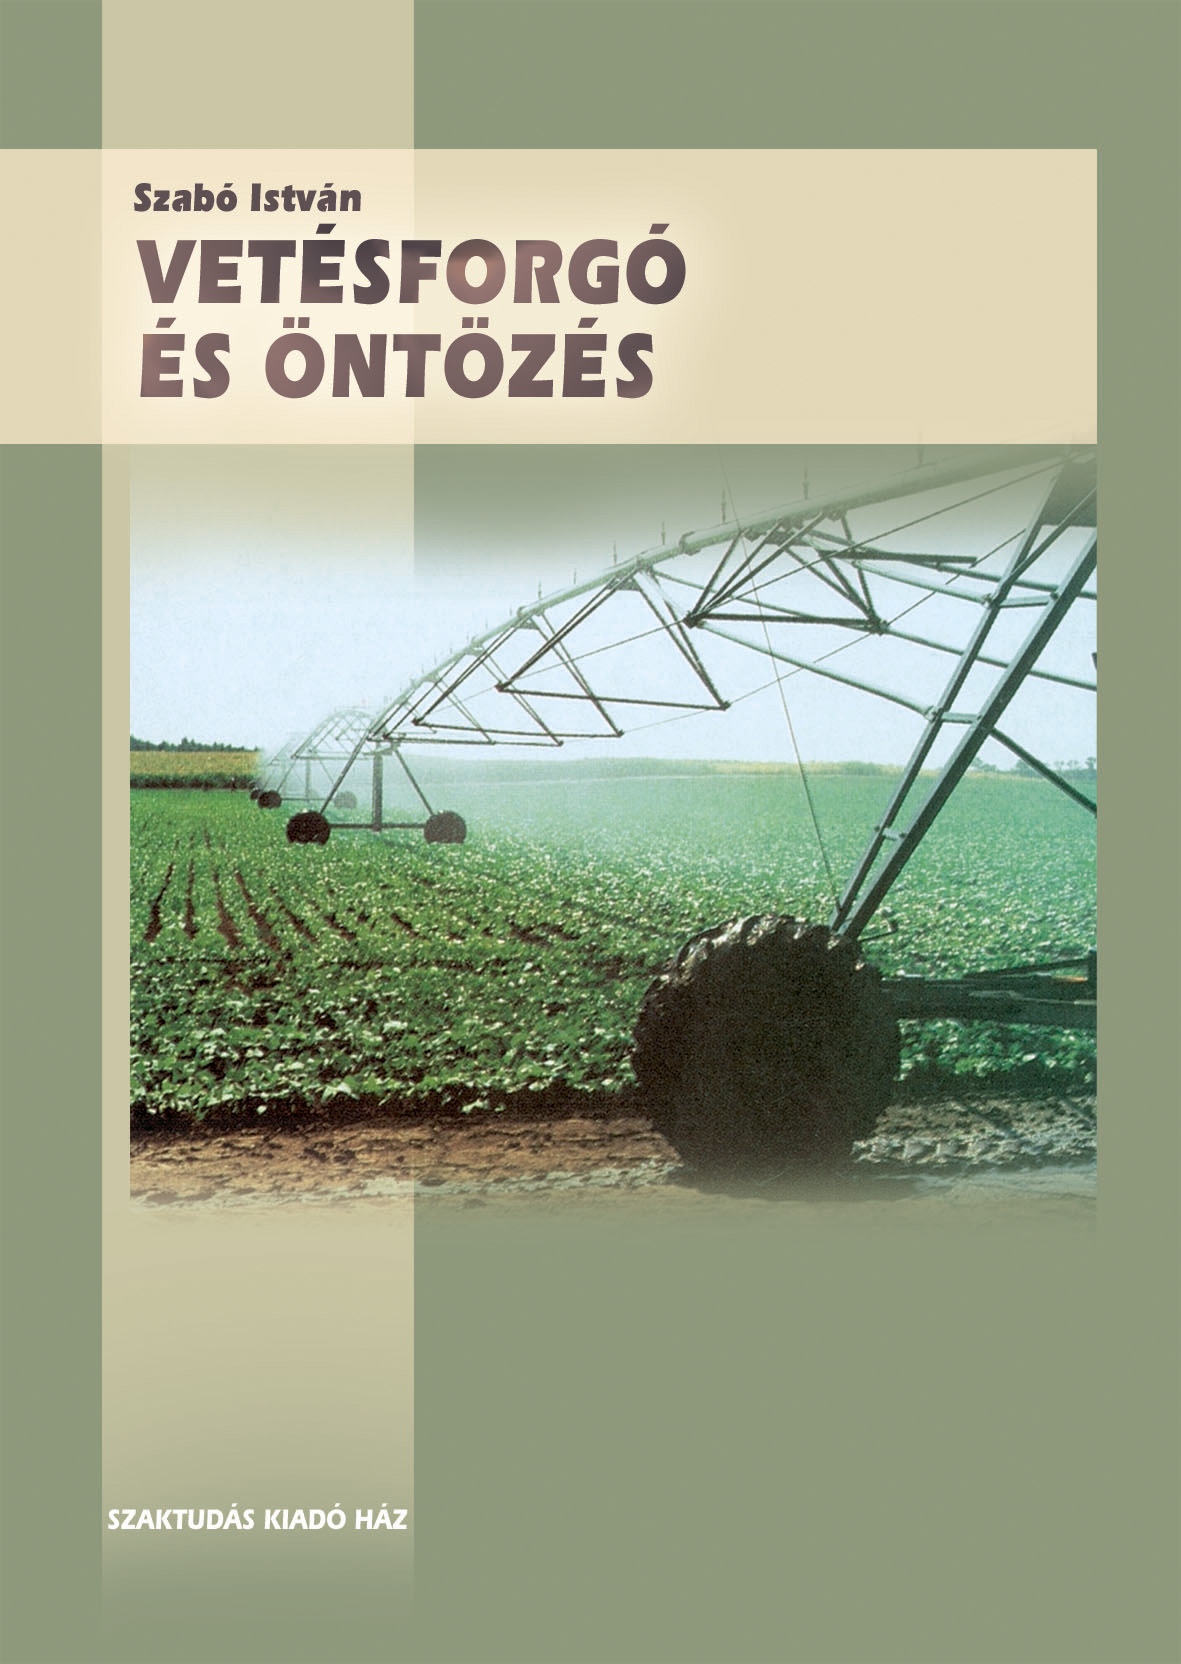 Crop rotation and irrigation